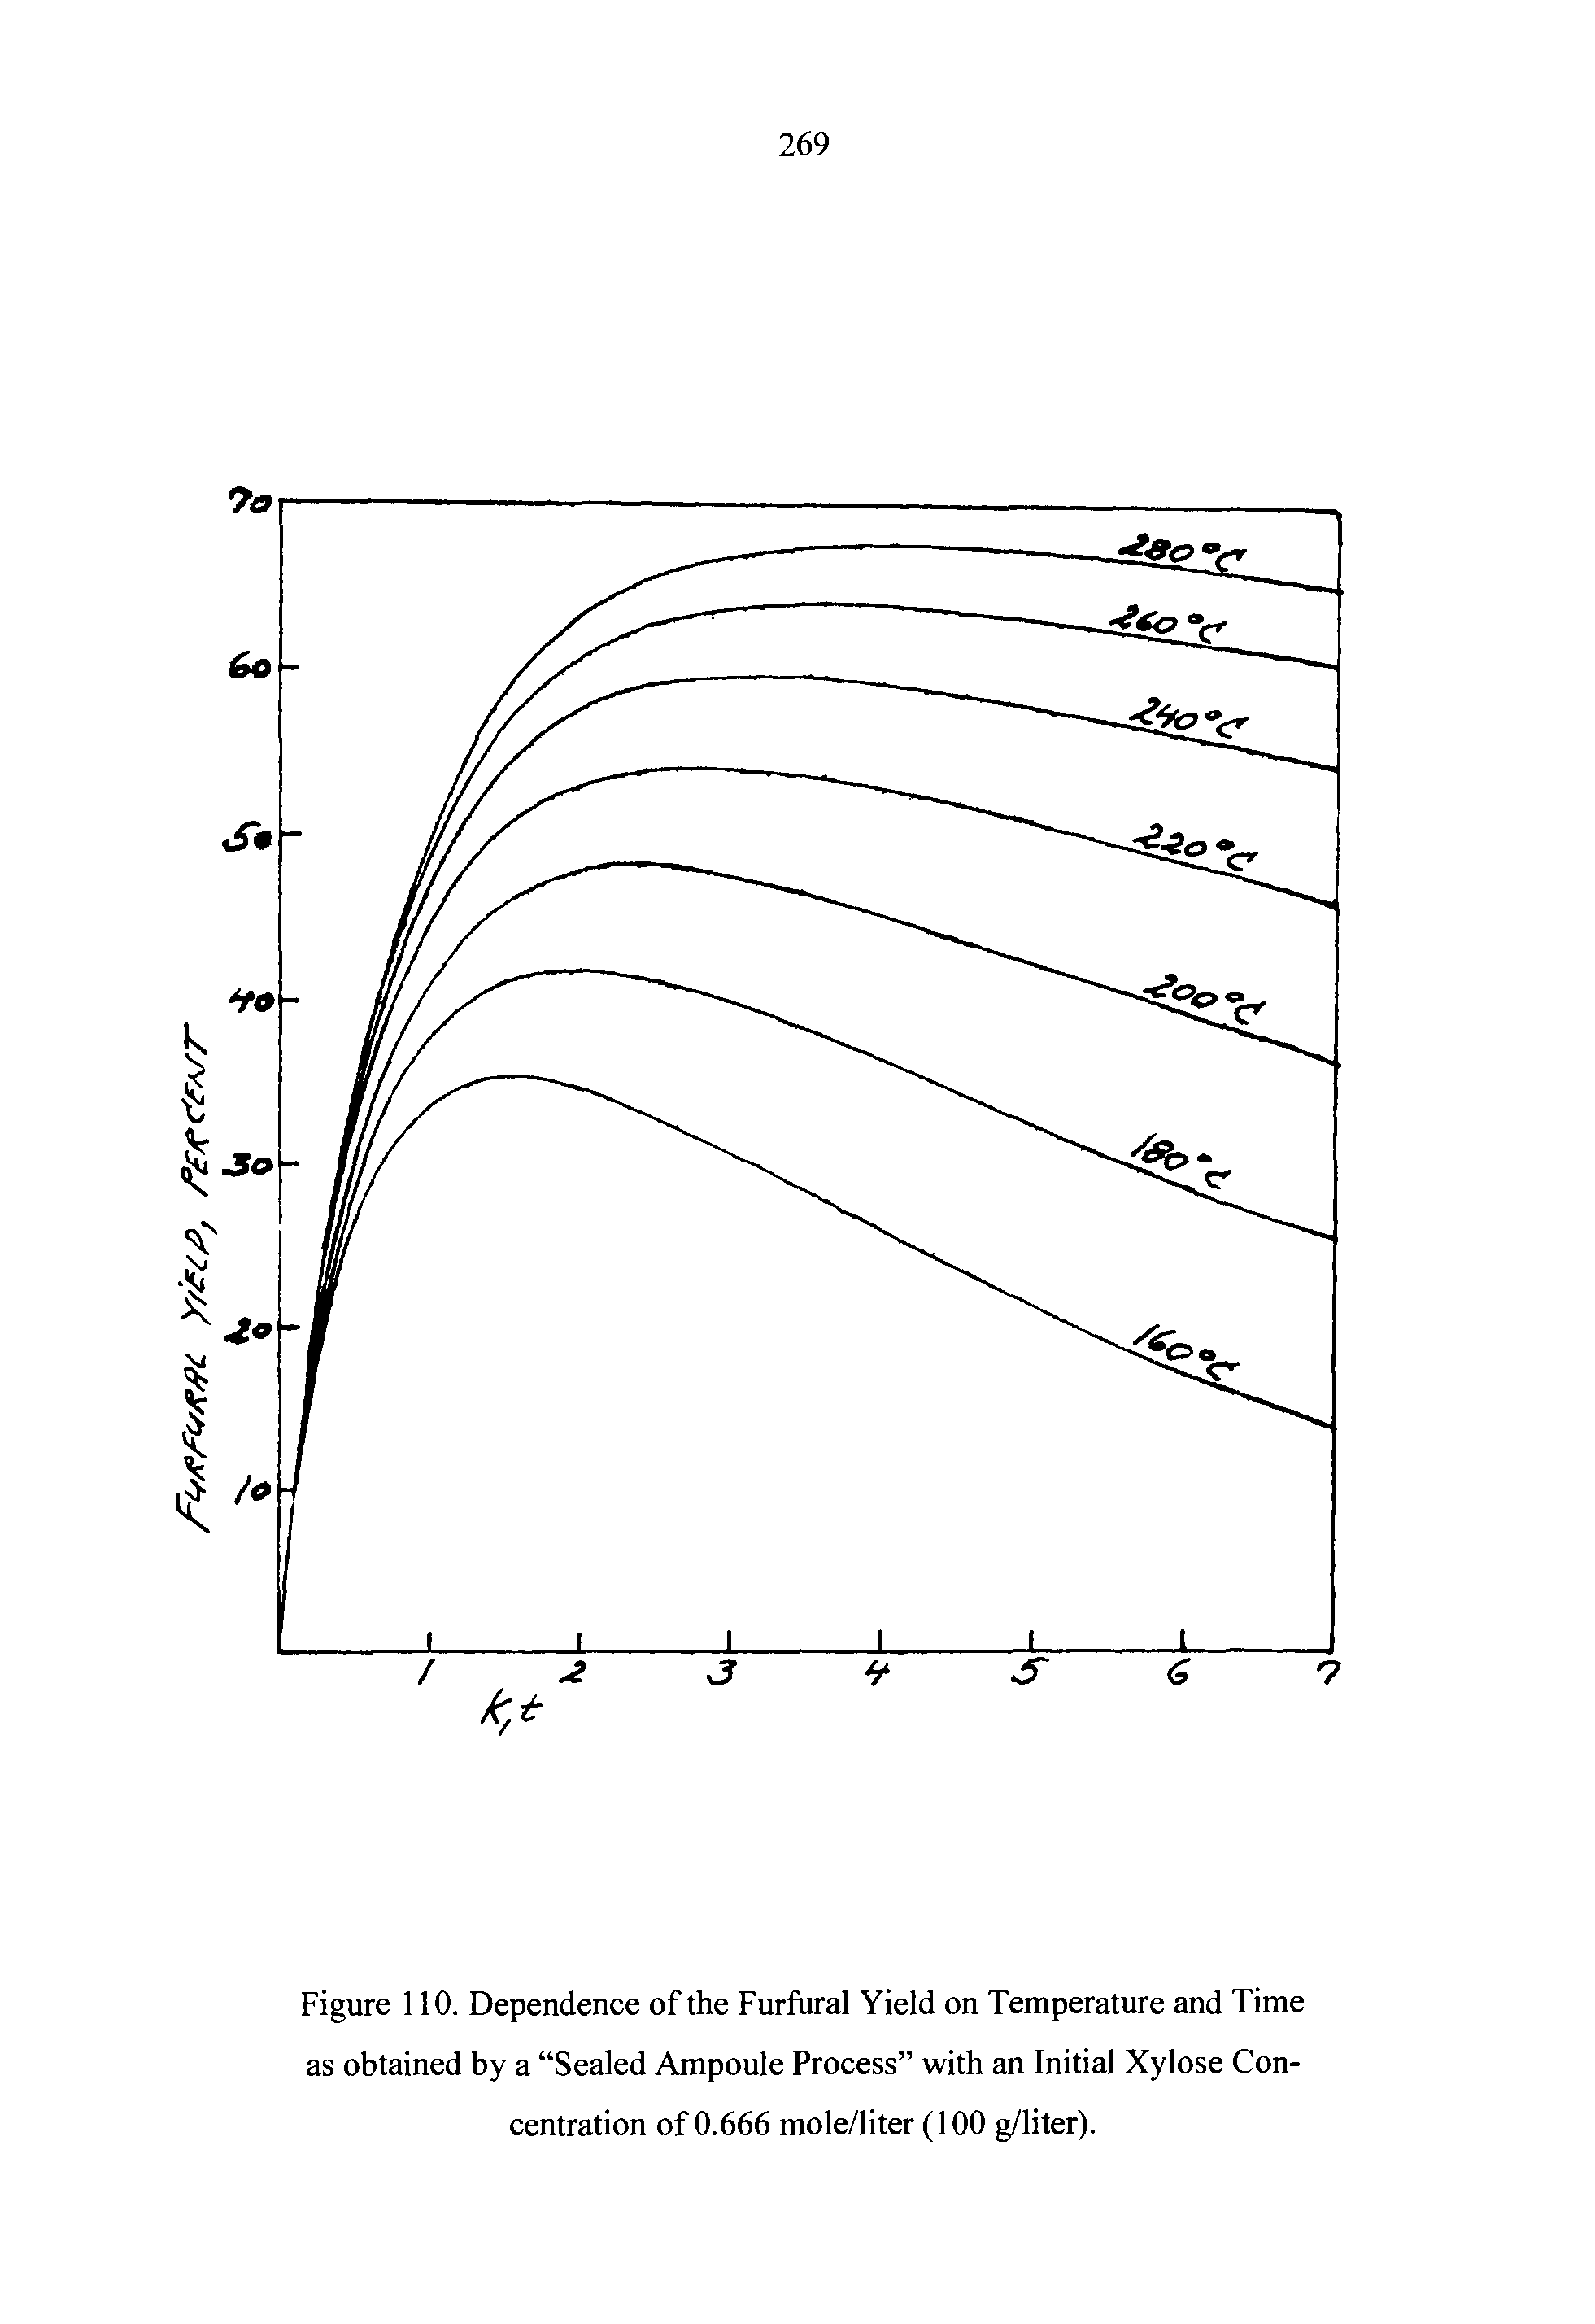 Figure 110. Dependence of the Furfural Yield on Temperature and Time as obtained by a Sealed Ampoule Process with an Initial Xylose Concentration of 0.666 mole/liter (100 g/liter).